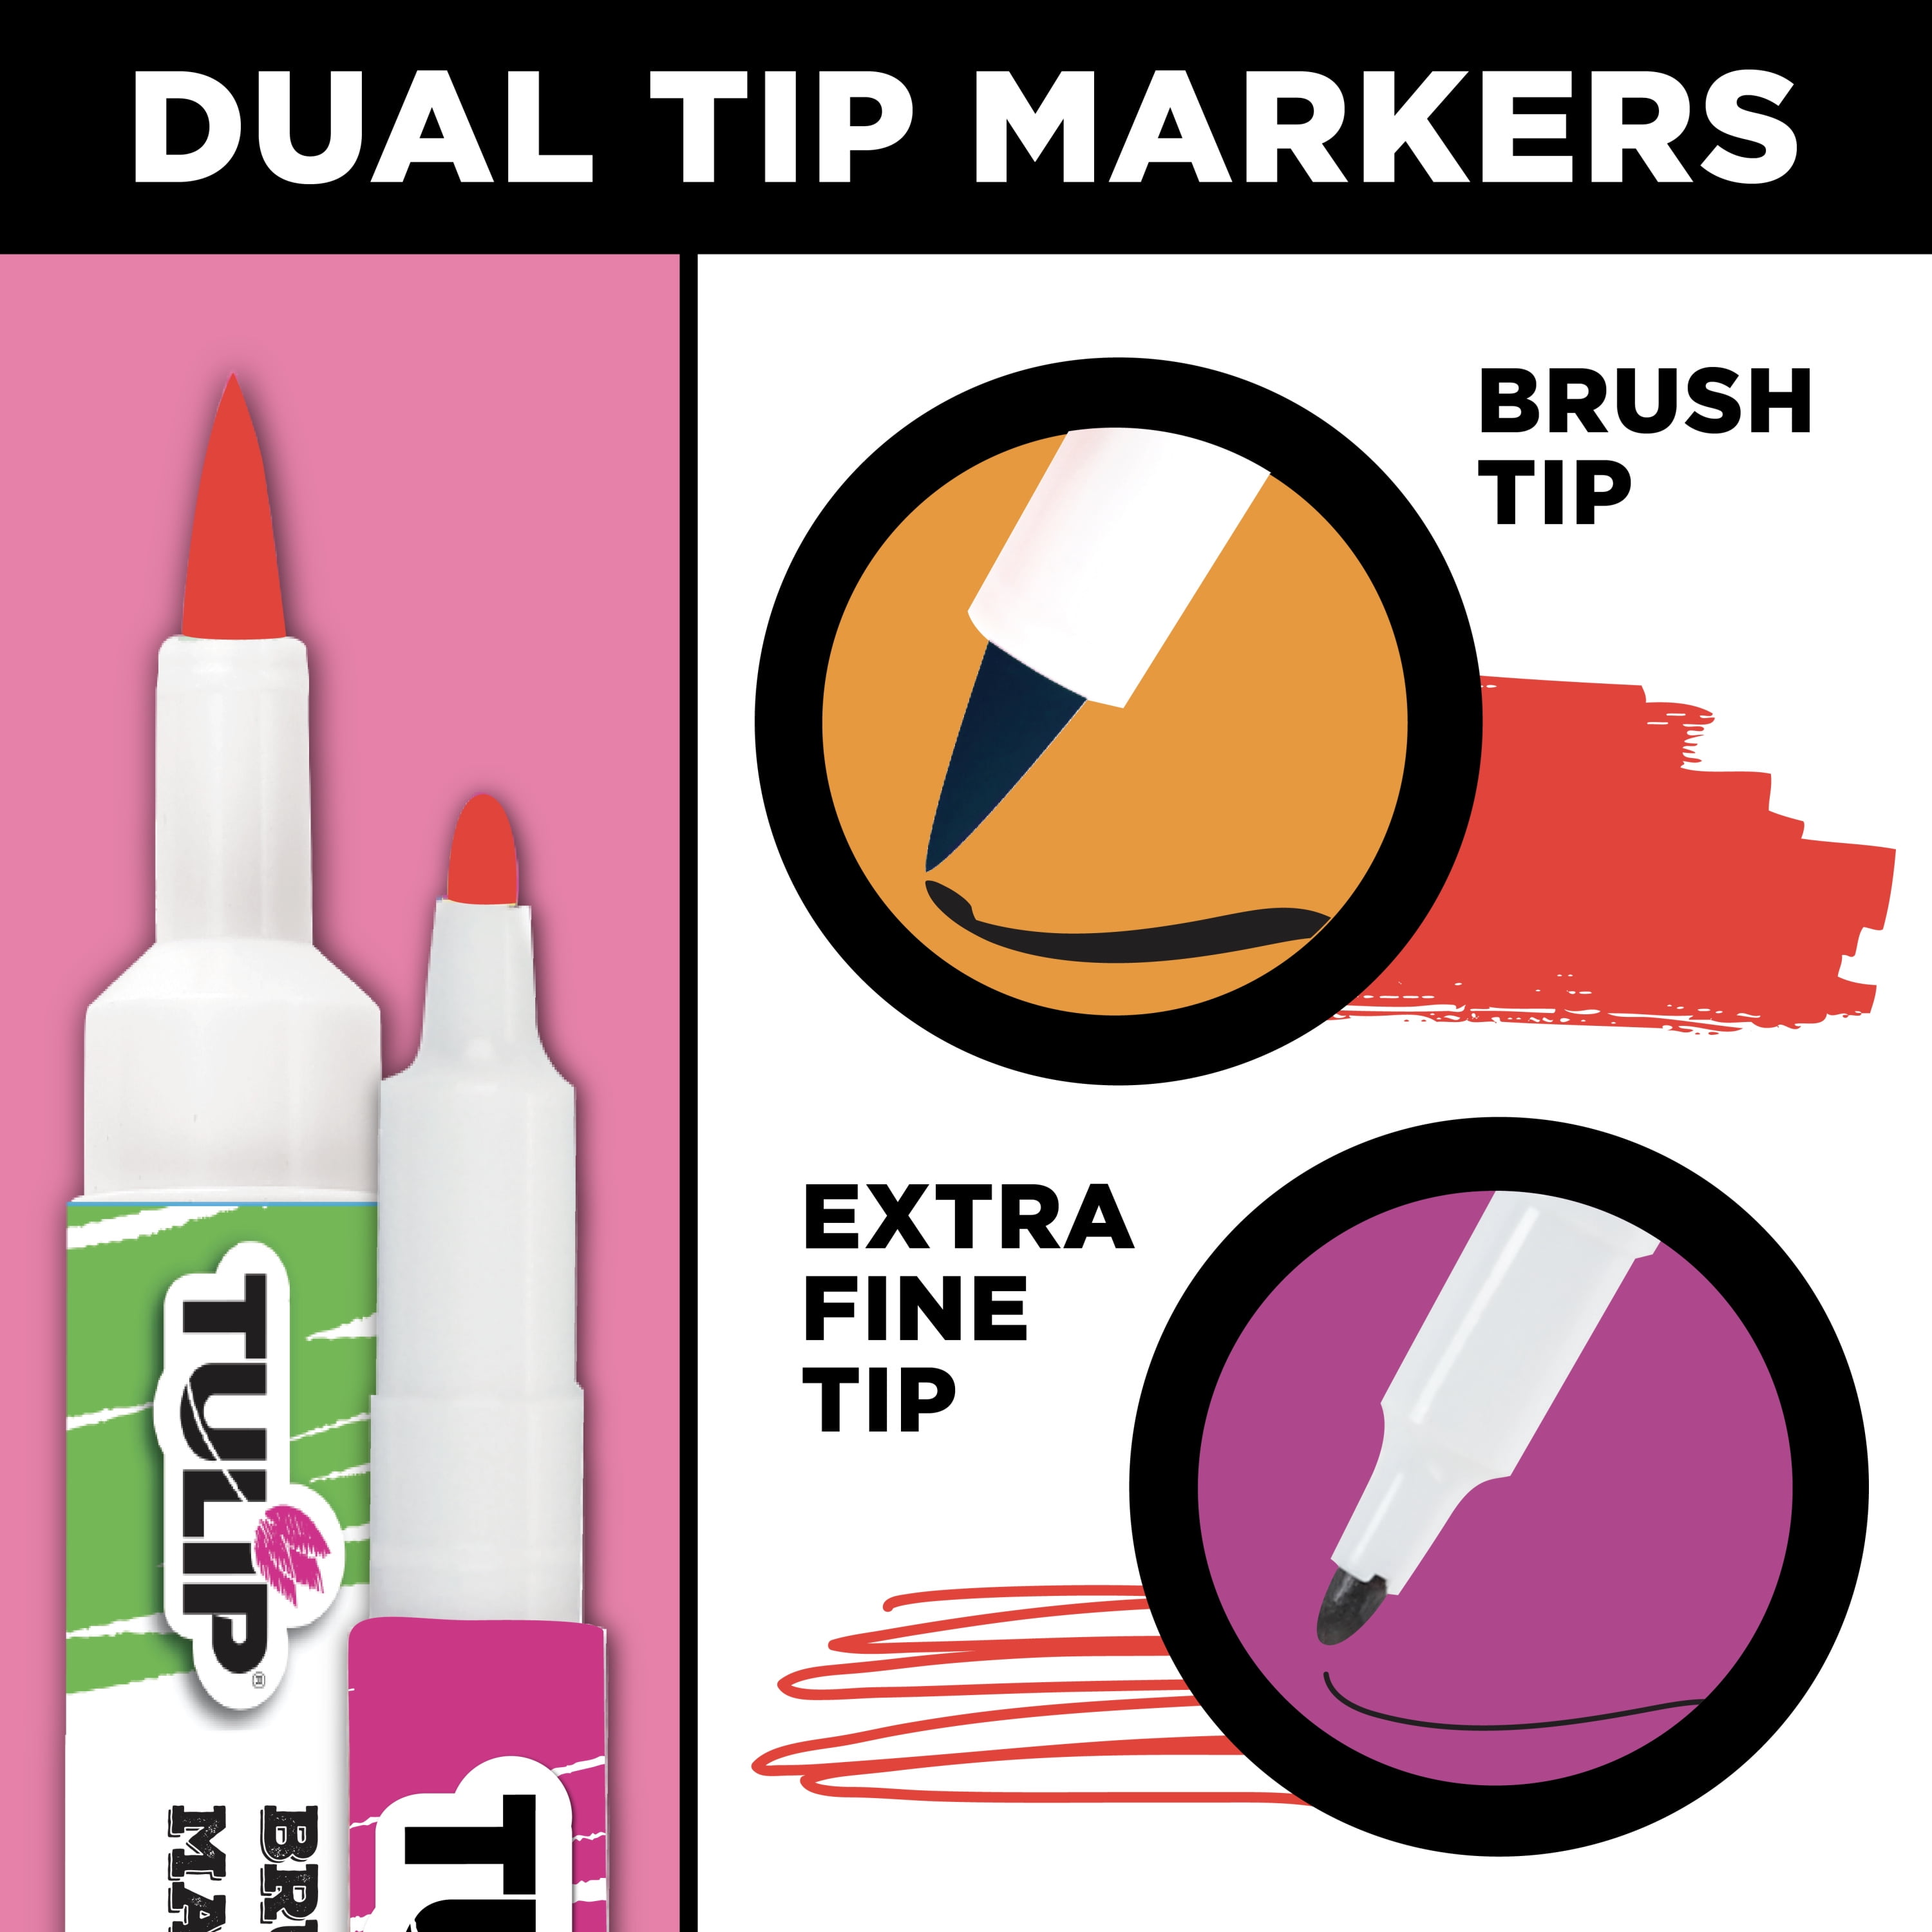 12 Packs: 5 ct. (60 total) Tulip® Multi Mix Tip Permanent Fabric Markers®